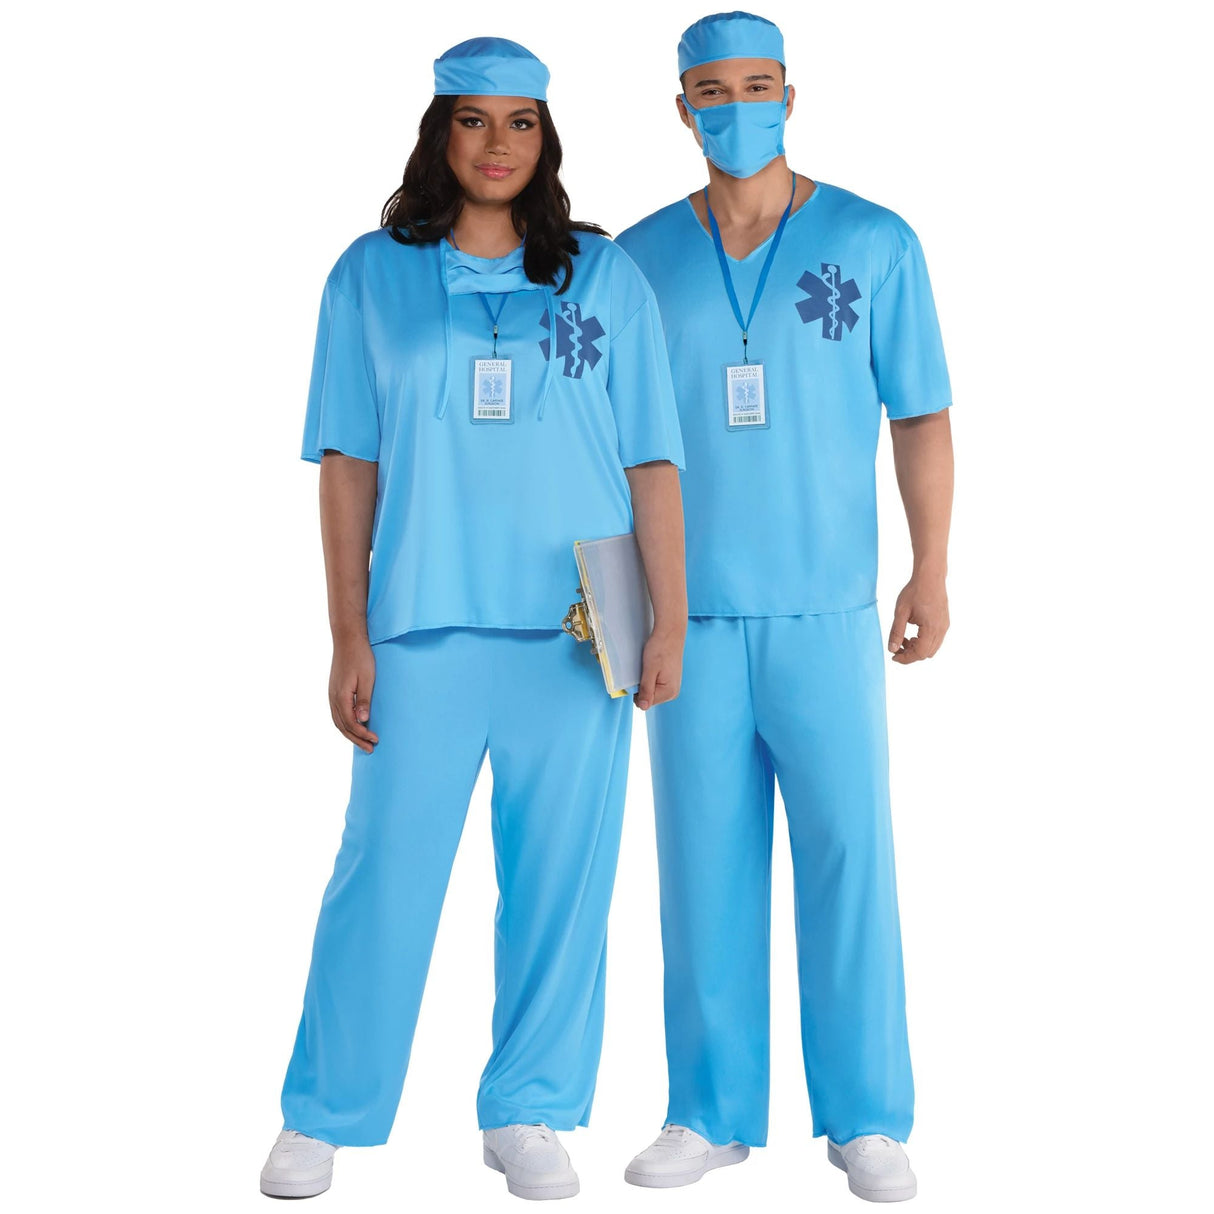 SUIT YOURSELF COSTUME CO. Costumes Doctor Costume for Adults 192937247808